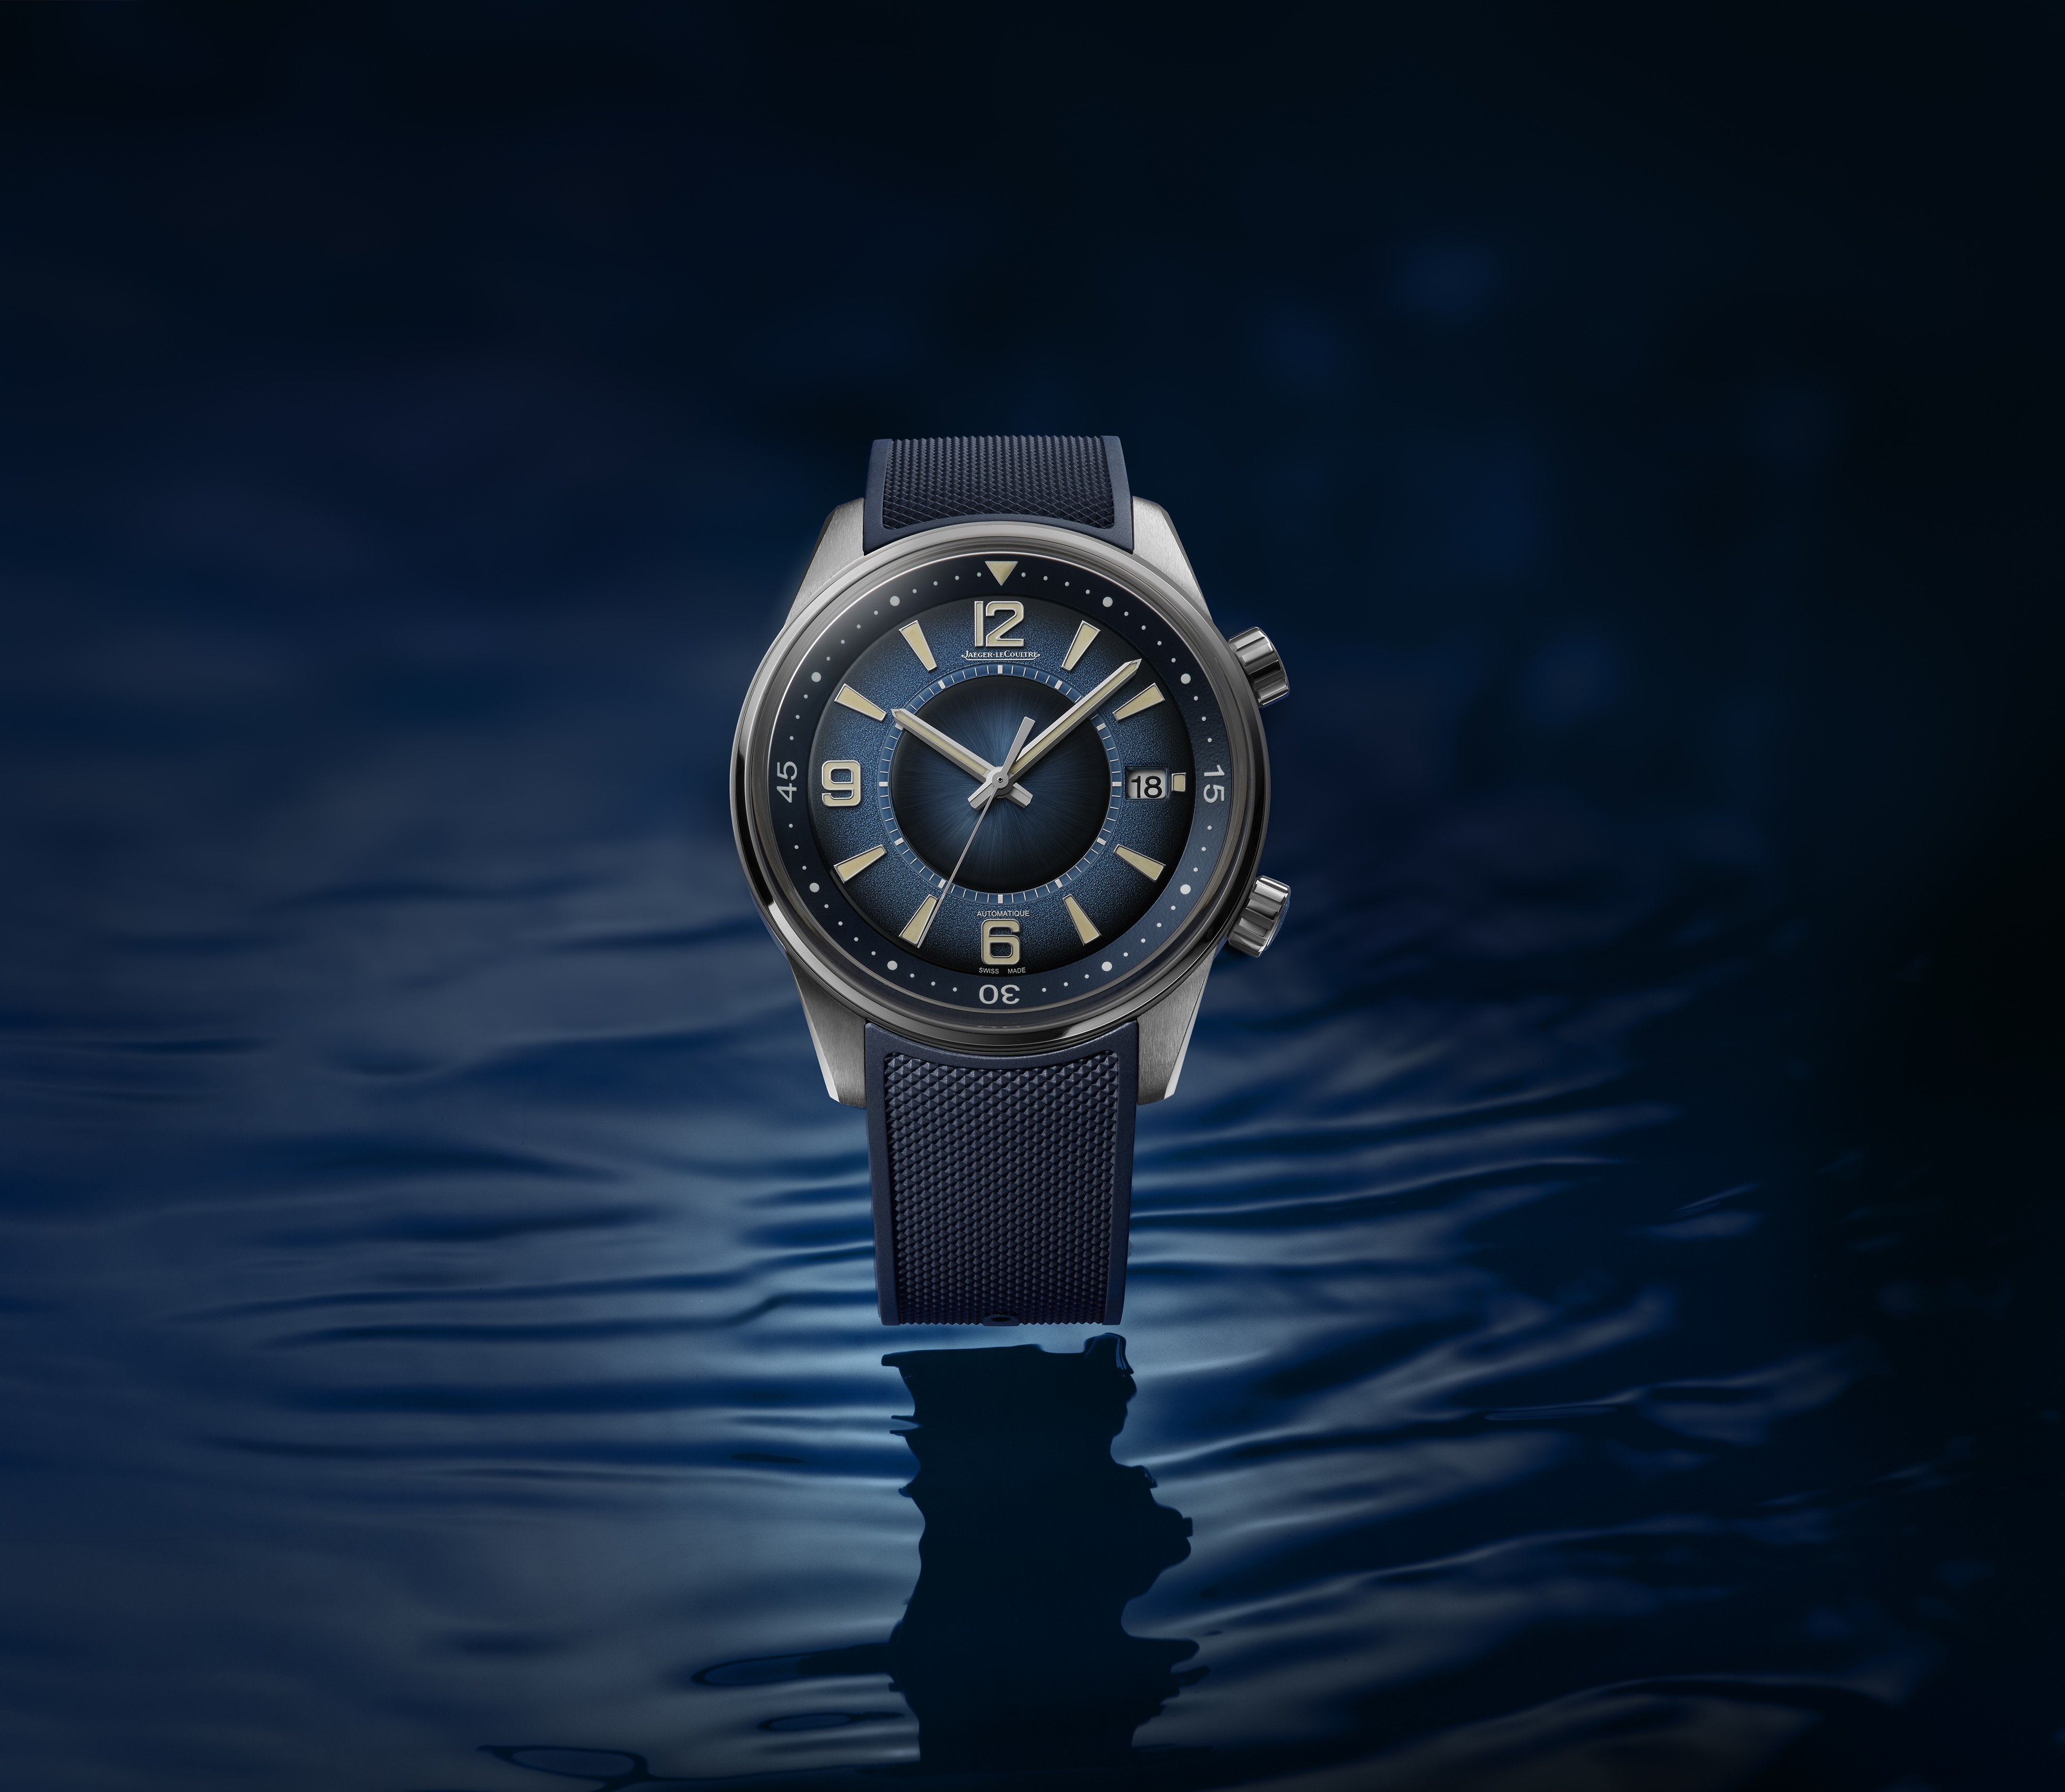 The Jaeger-Le Coultre Polaris Date is equipped with two crowns and a rotating inner bezel to measure dive time.